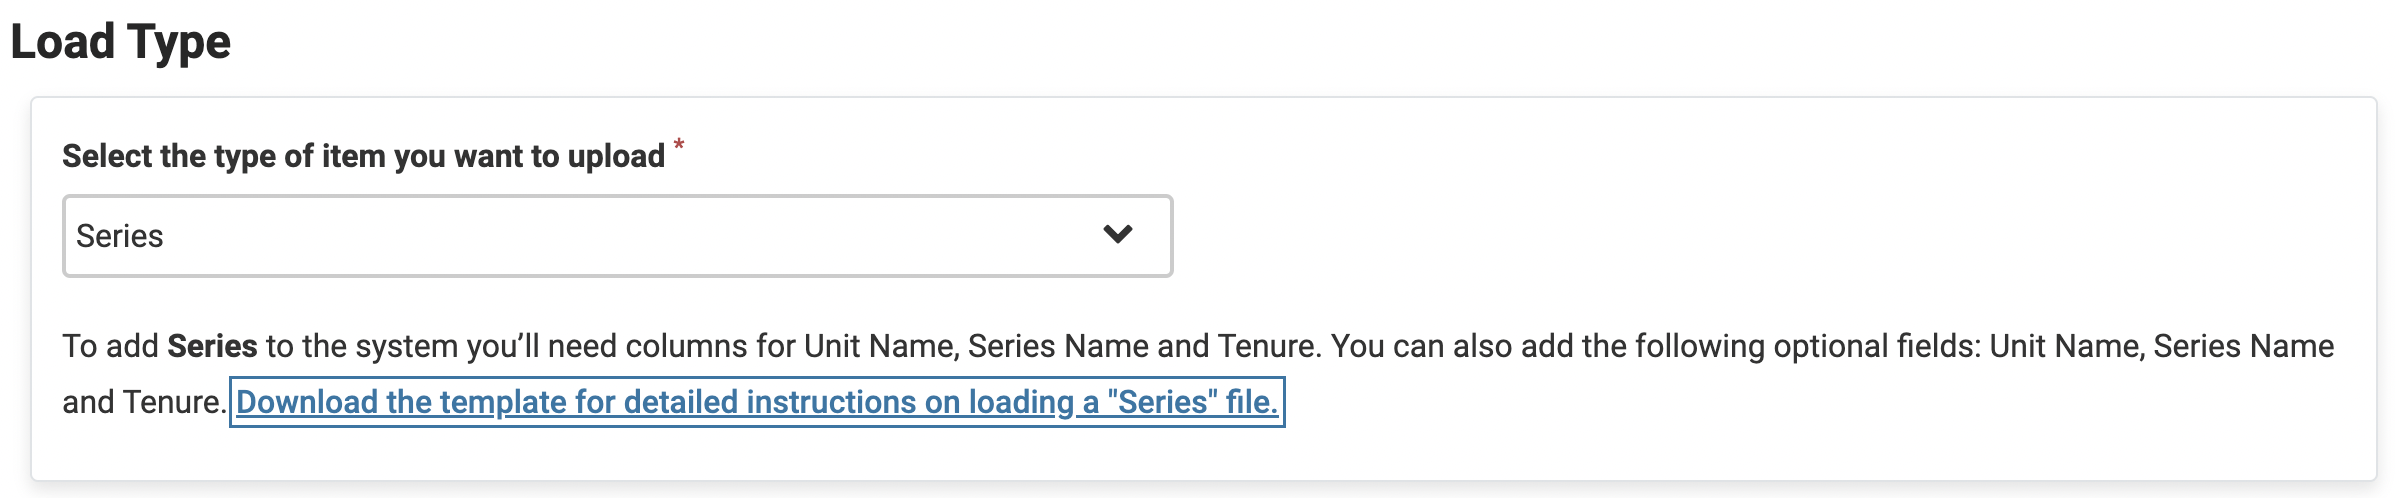 Load Type section with Series selected and the Download the template for detailed instructions on loading a "Series" file link selected